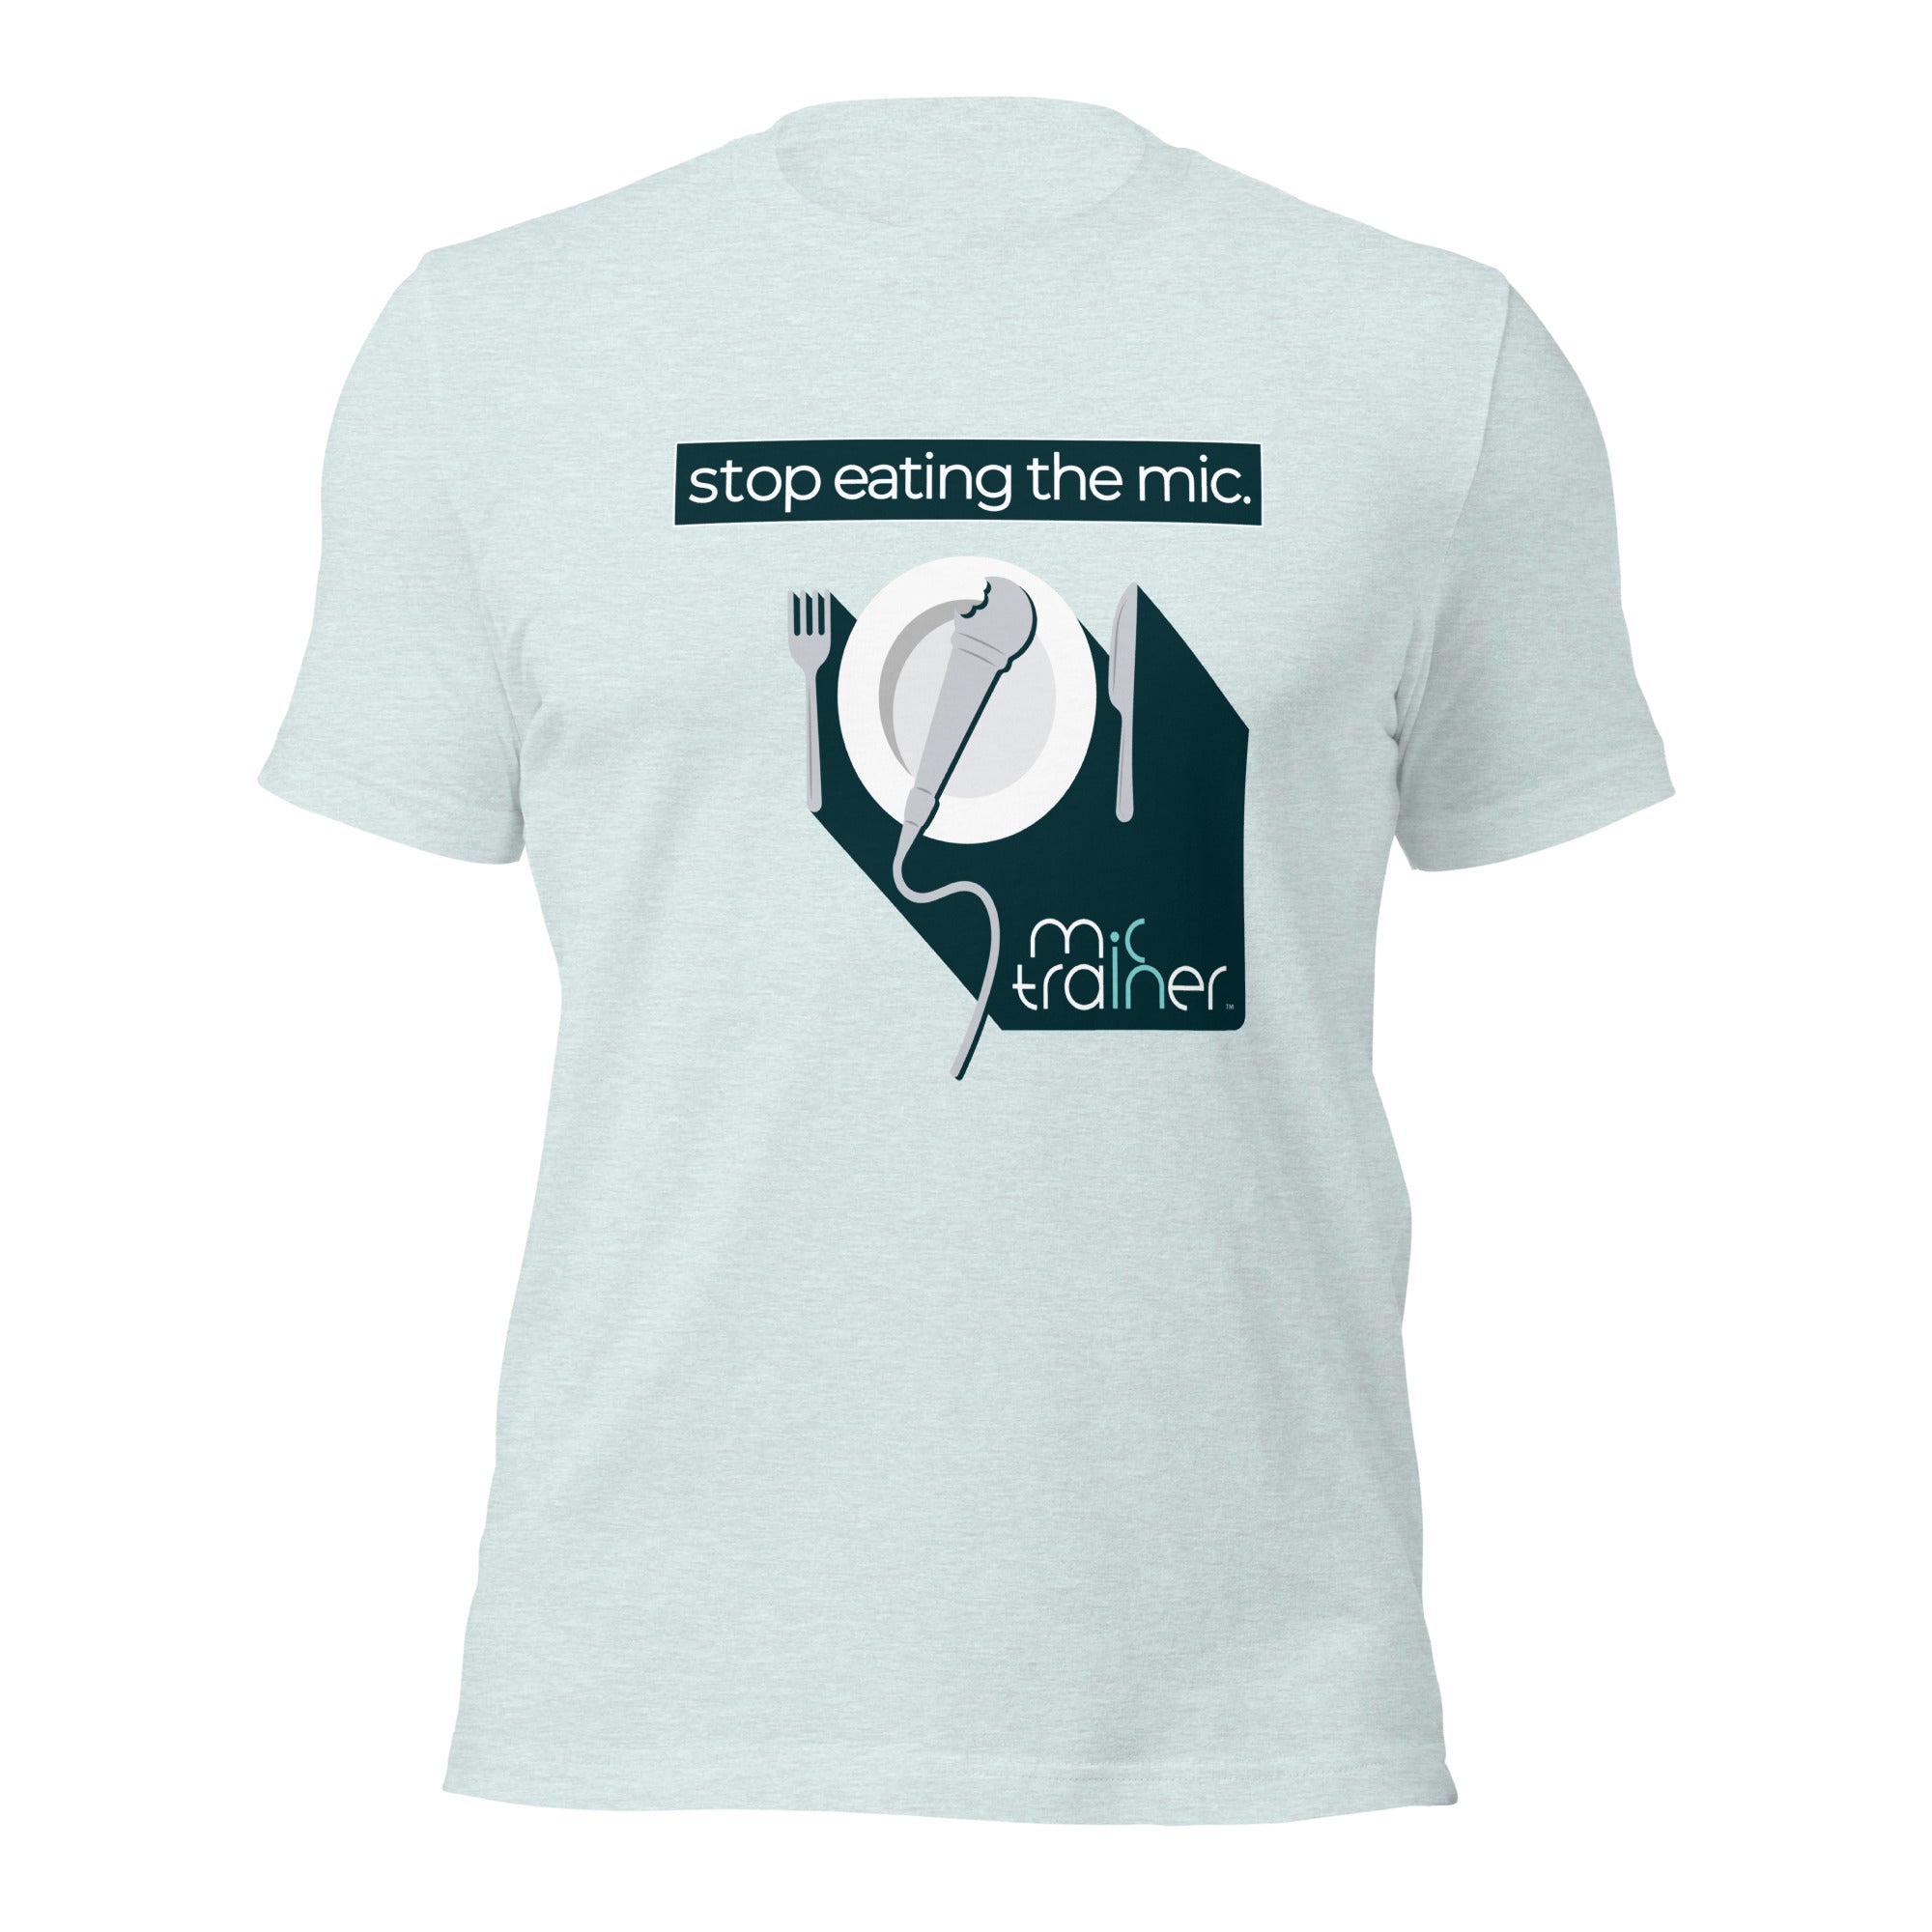 Stop Eating The Mic - Unisex T-Shirt - Mic Trainer